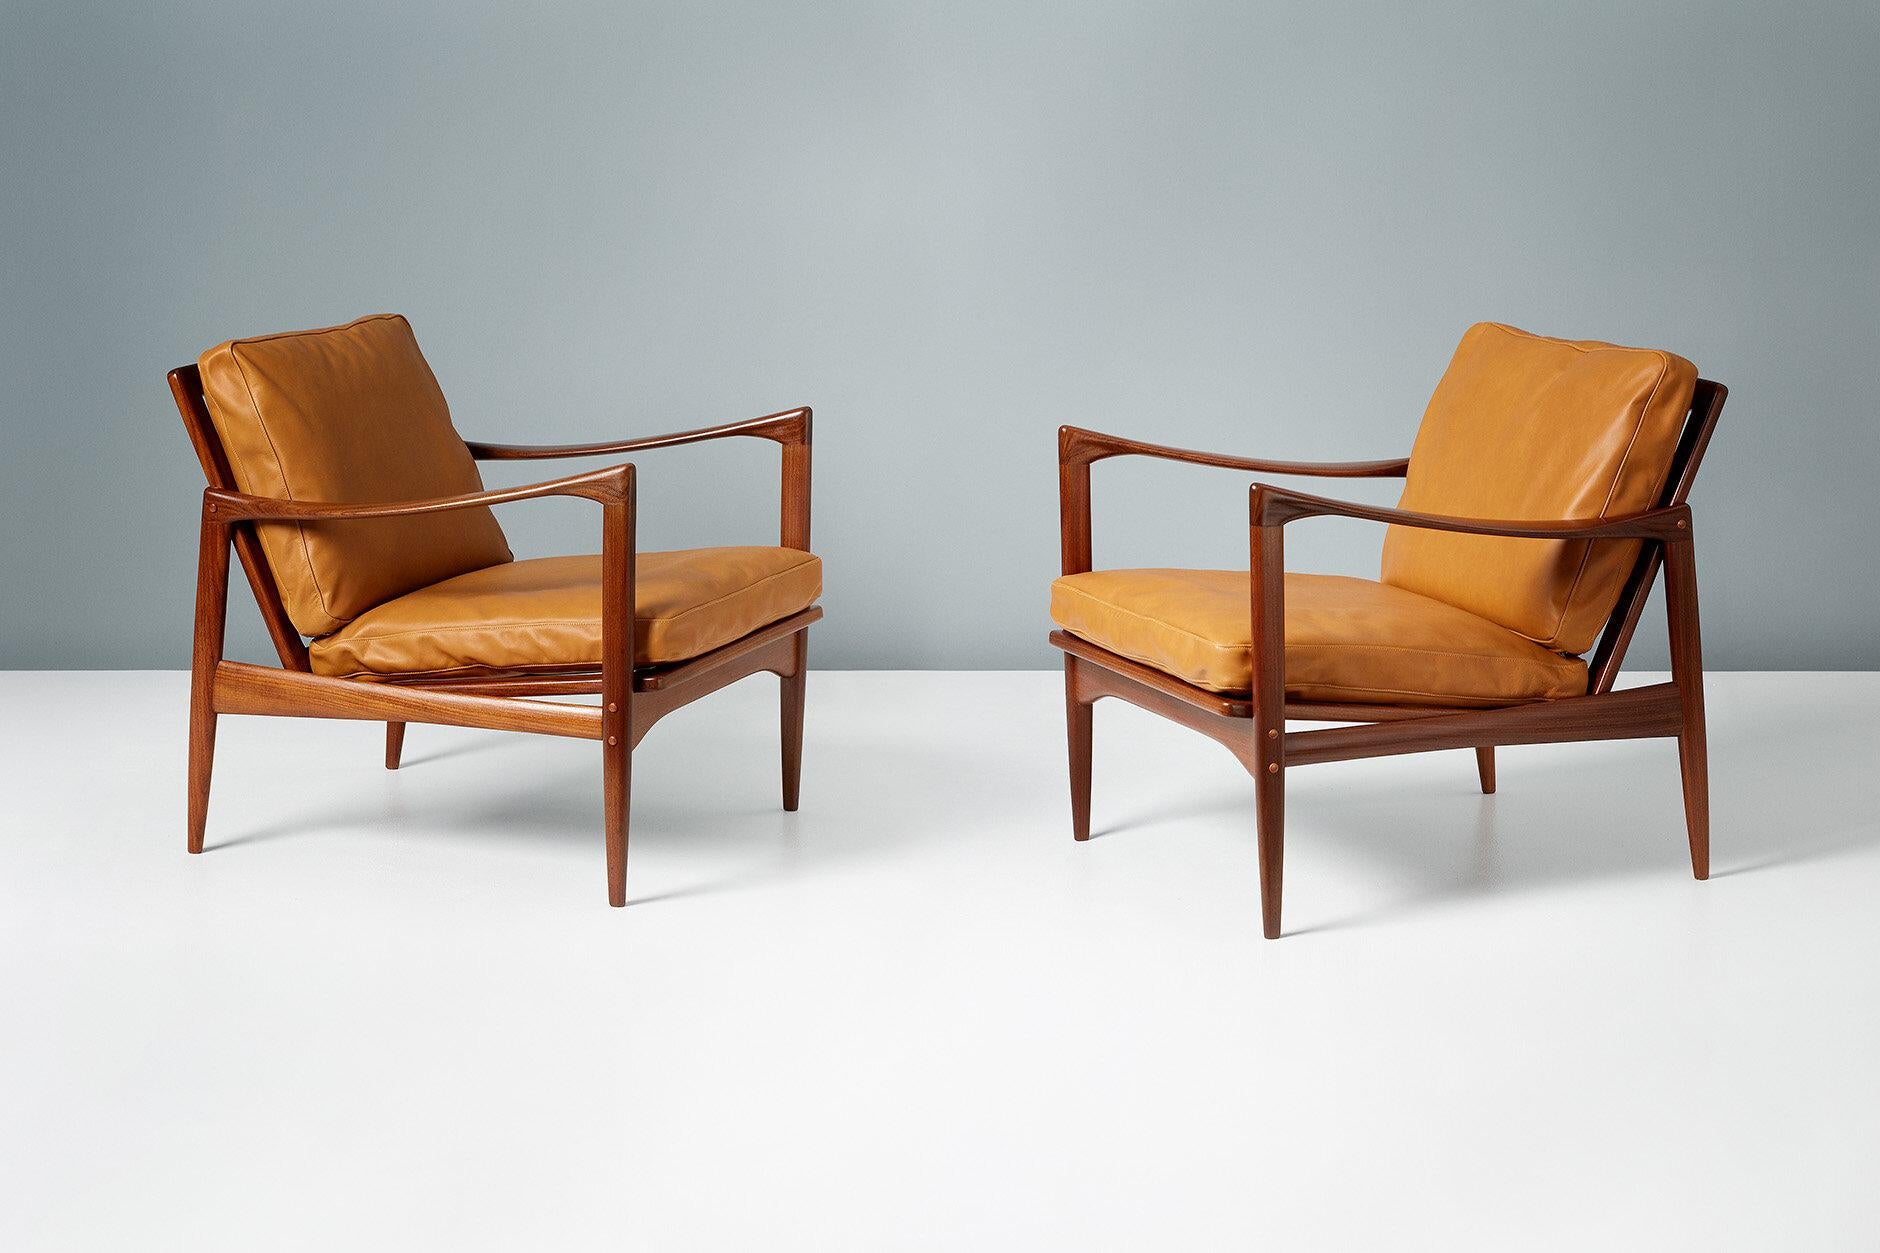 Ib Kofod-Larsen Candidate Lounge Chairs, circa 1960 In Excellent Condition For Sale In London, GB